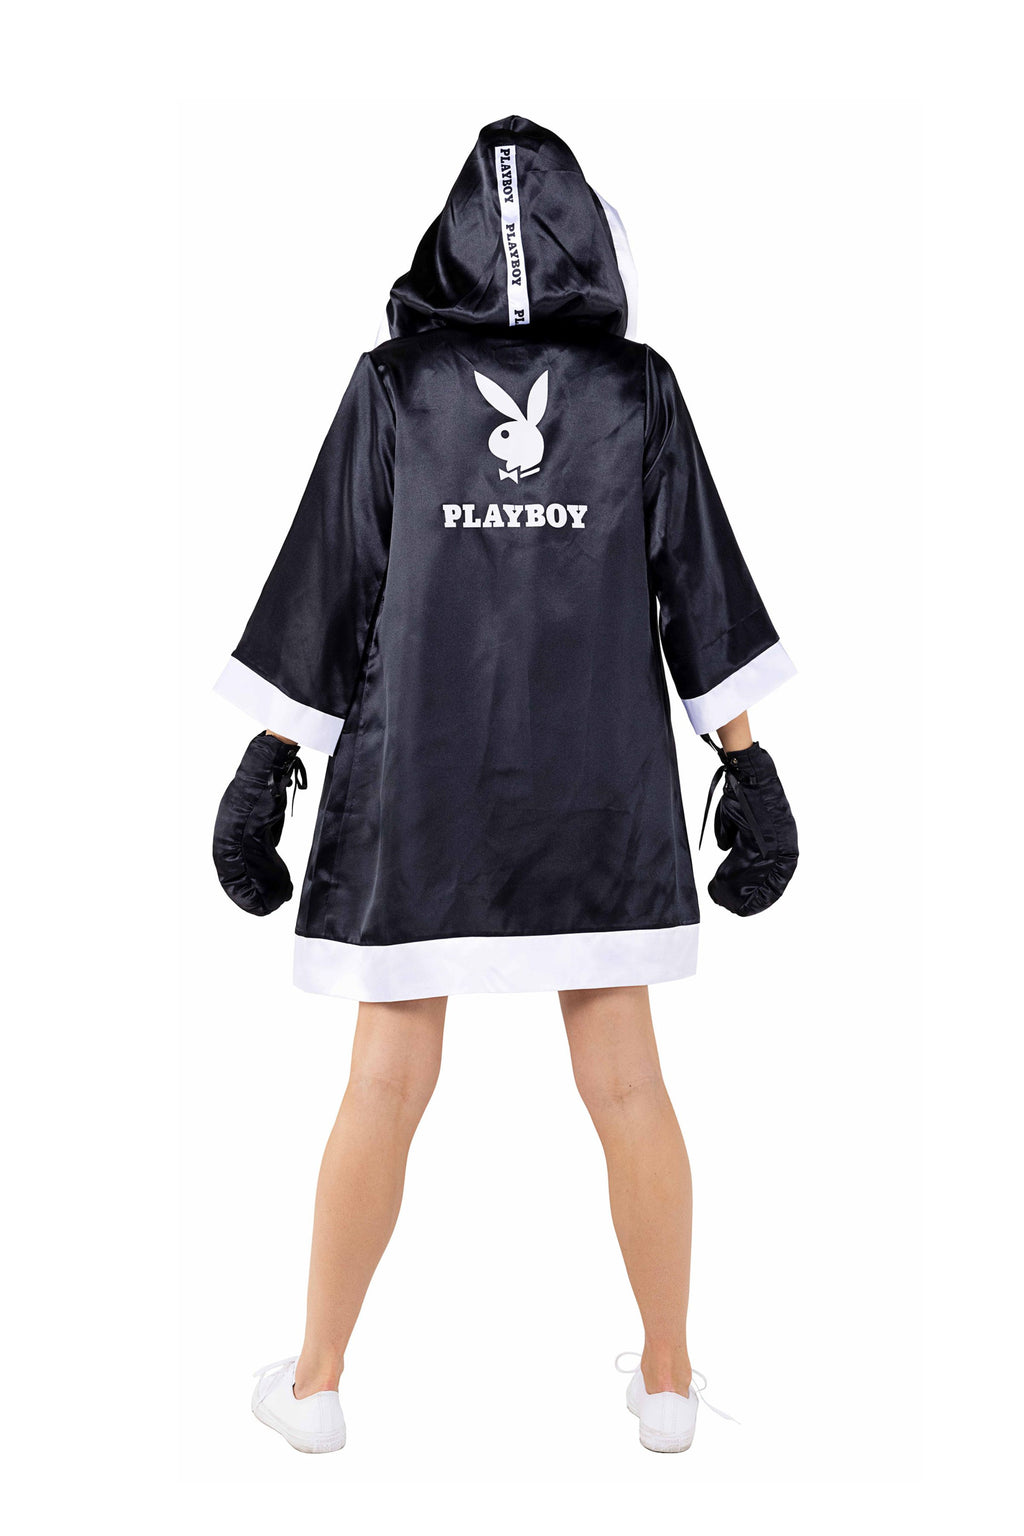 Playboy Knockout Boxer Outfit